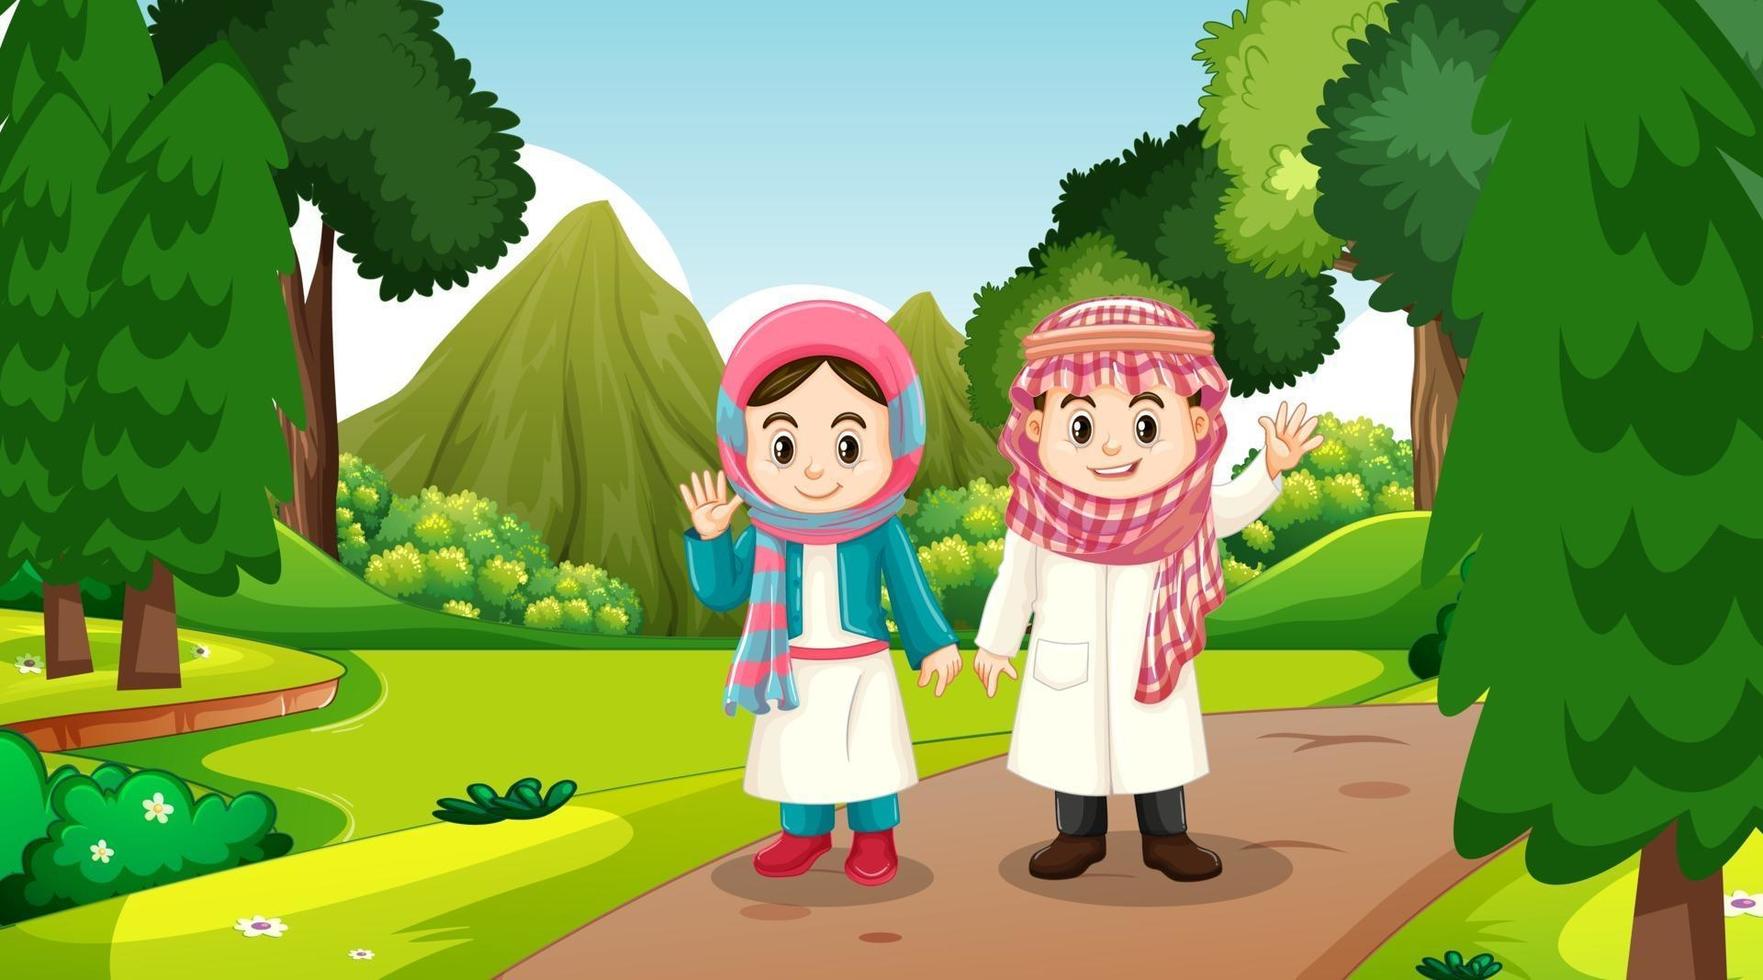 Muslim kids wears traditional clothes in the forest scene vector